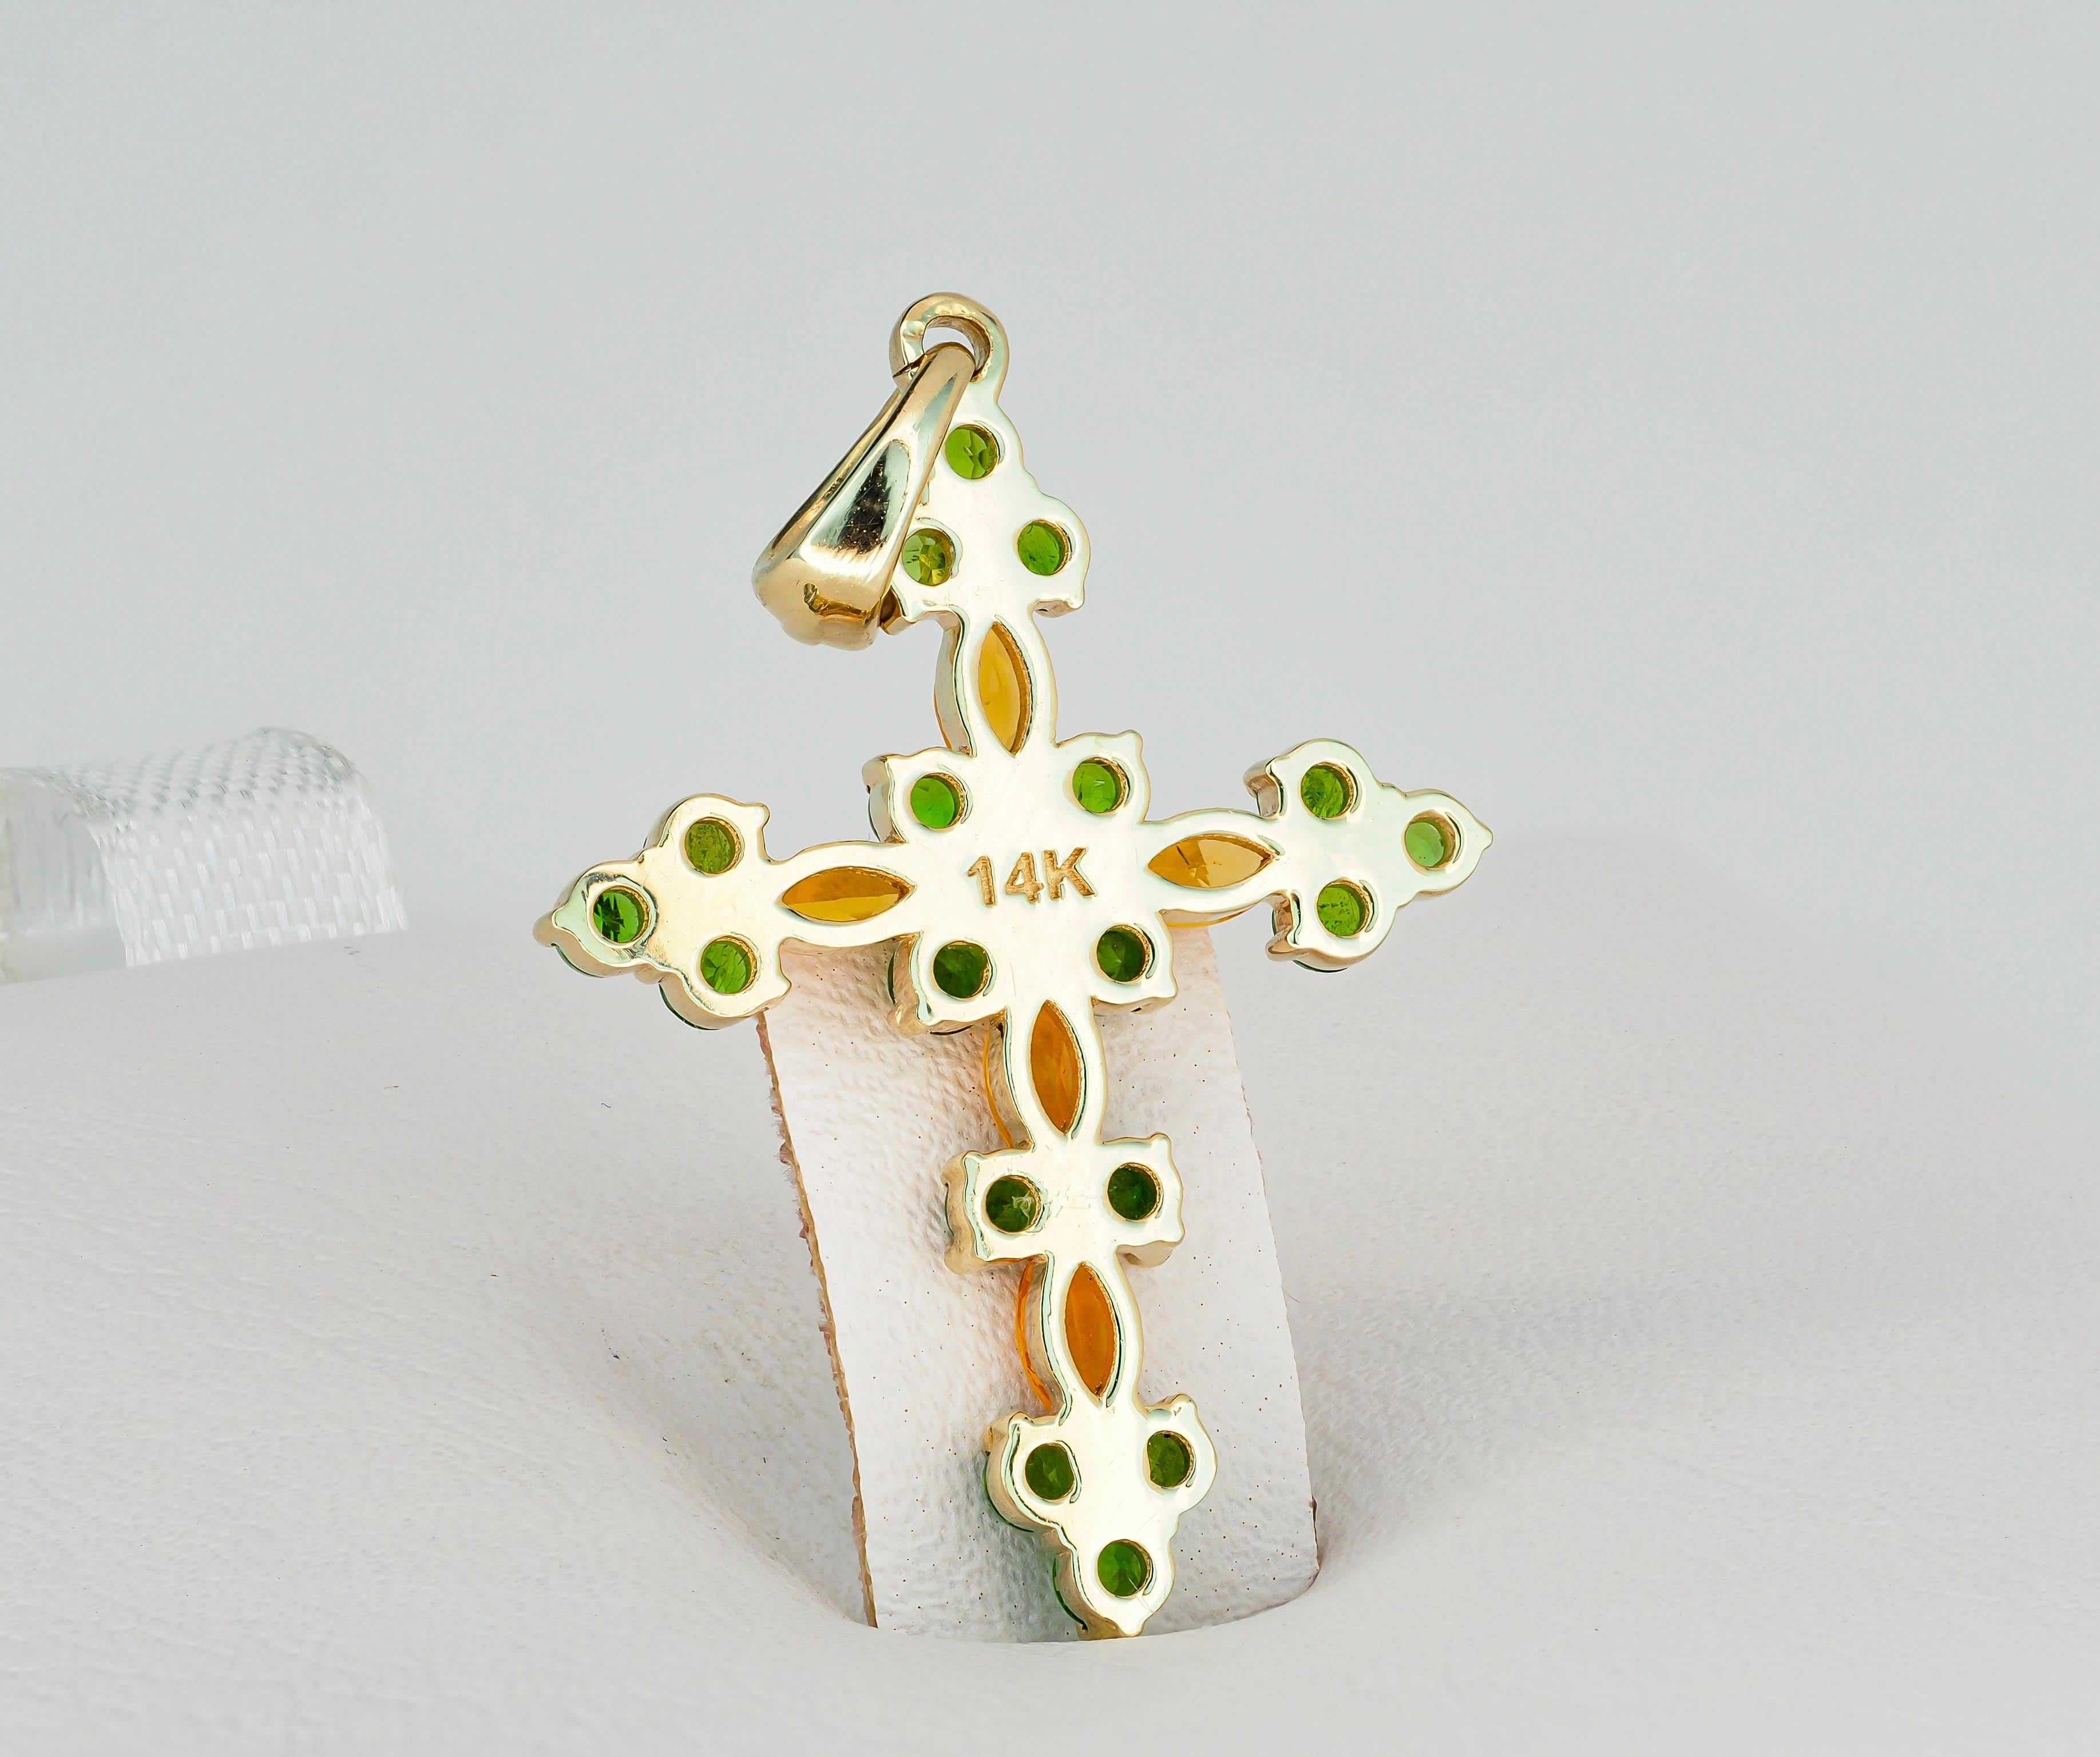 Marquise Cut 14k Gold Cross Pendant with Opals and Chrome Diopsides For Sale